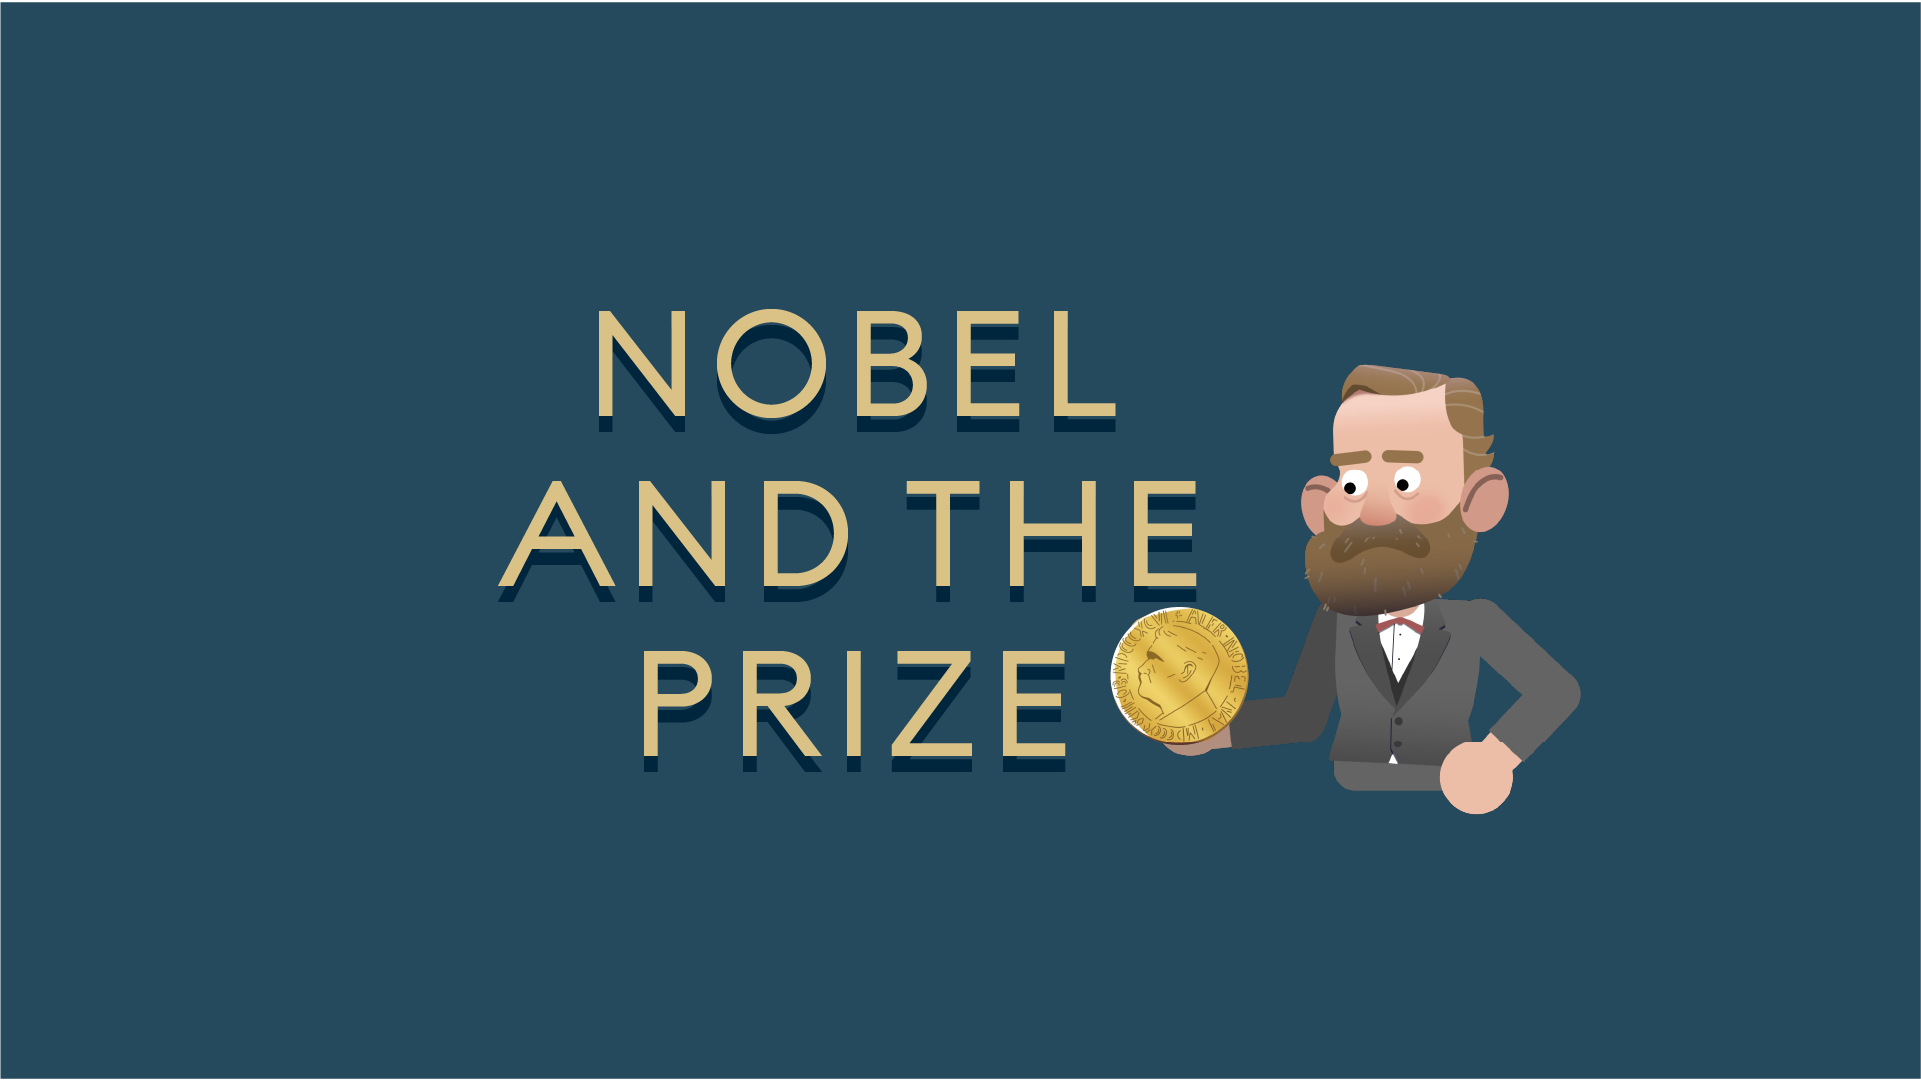 Alfred Nobel and the prize